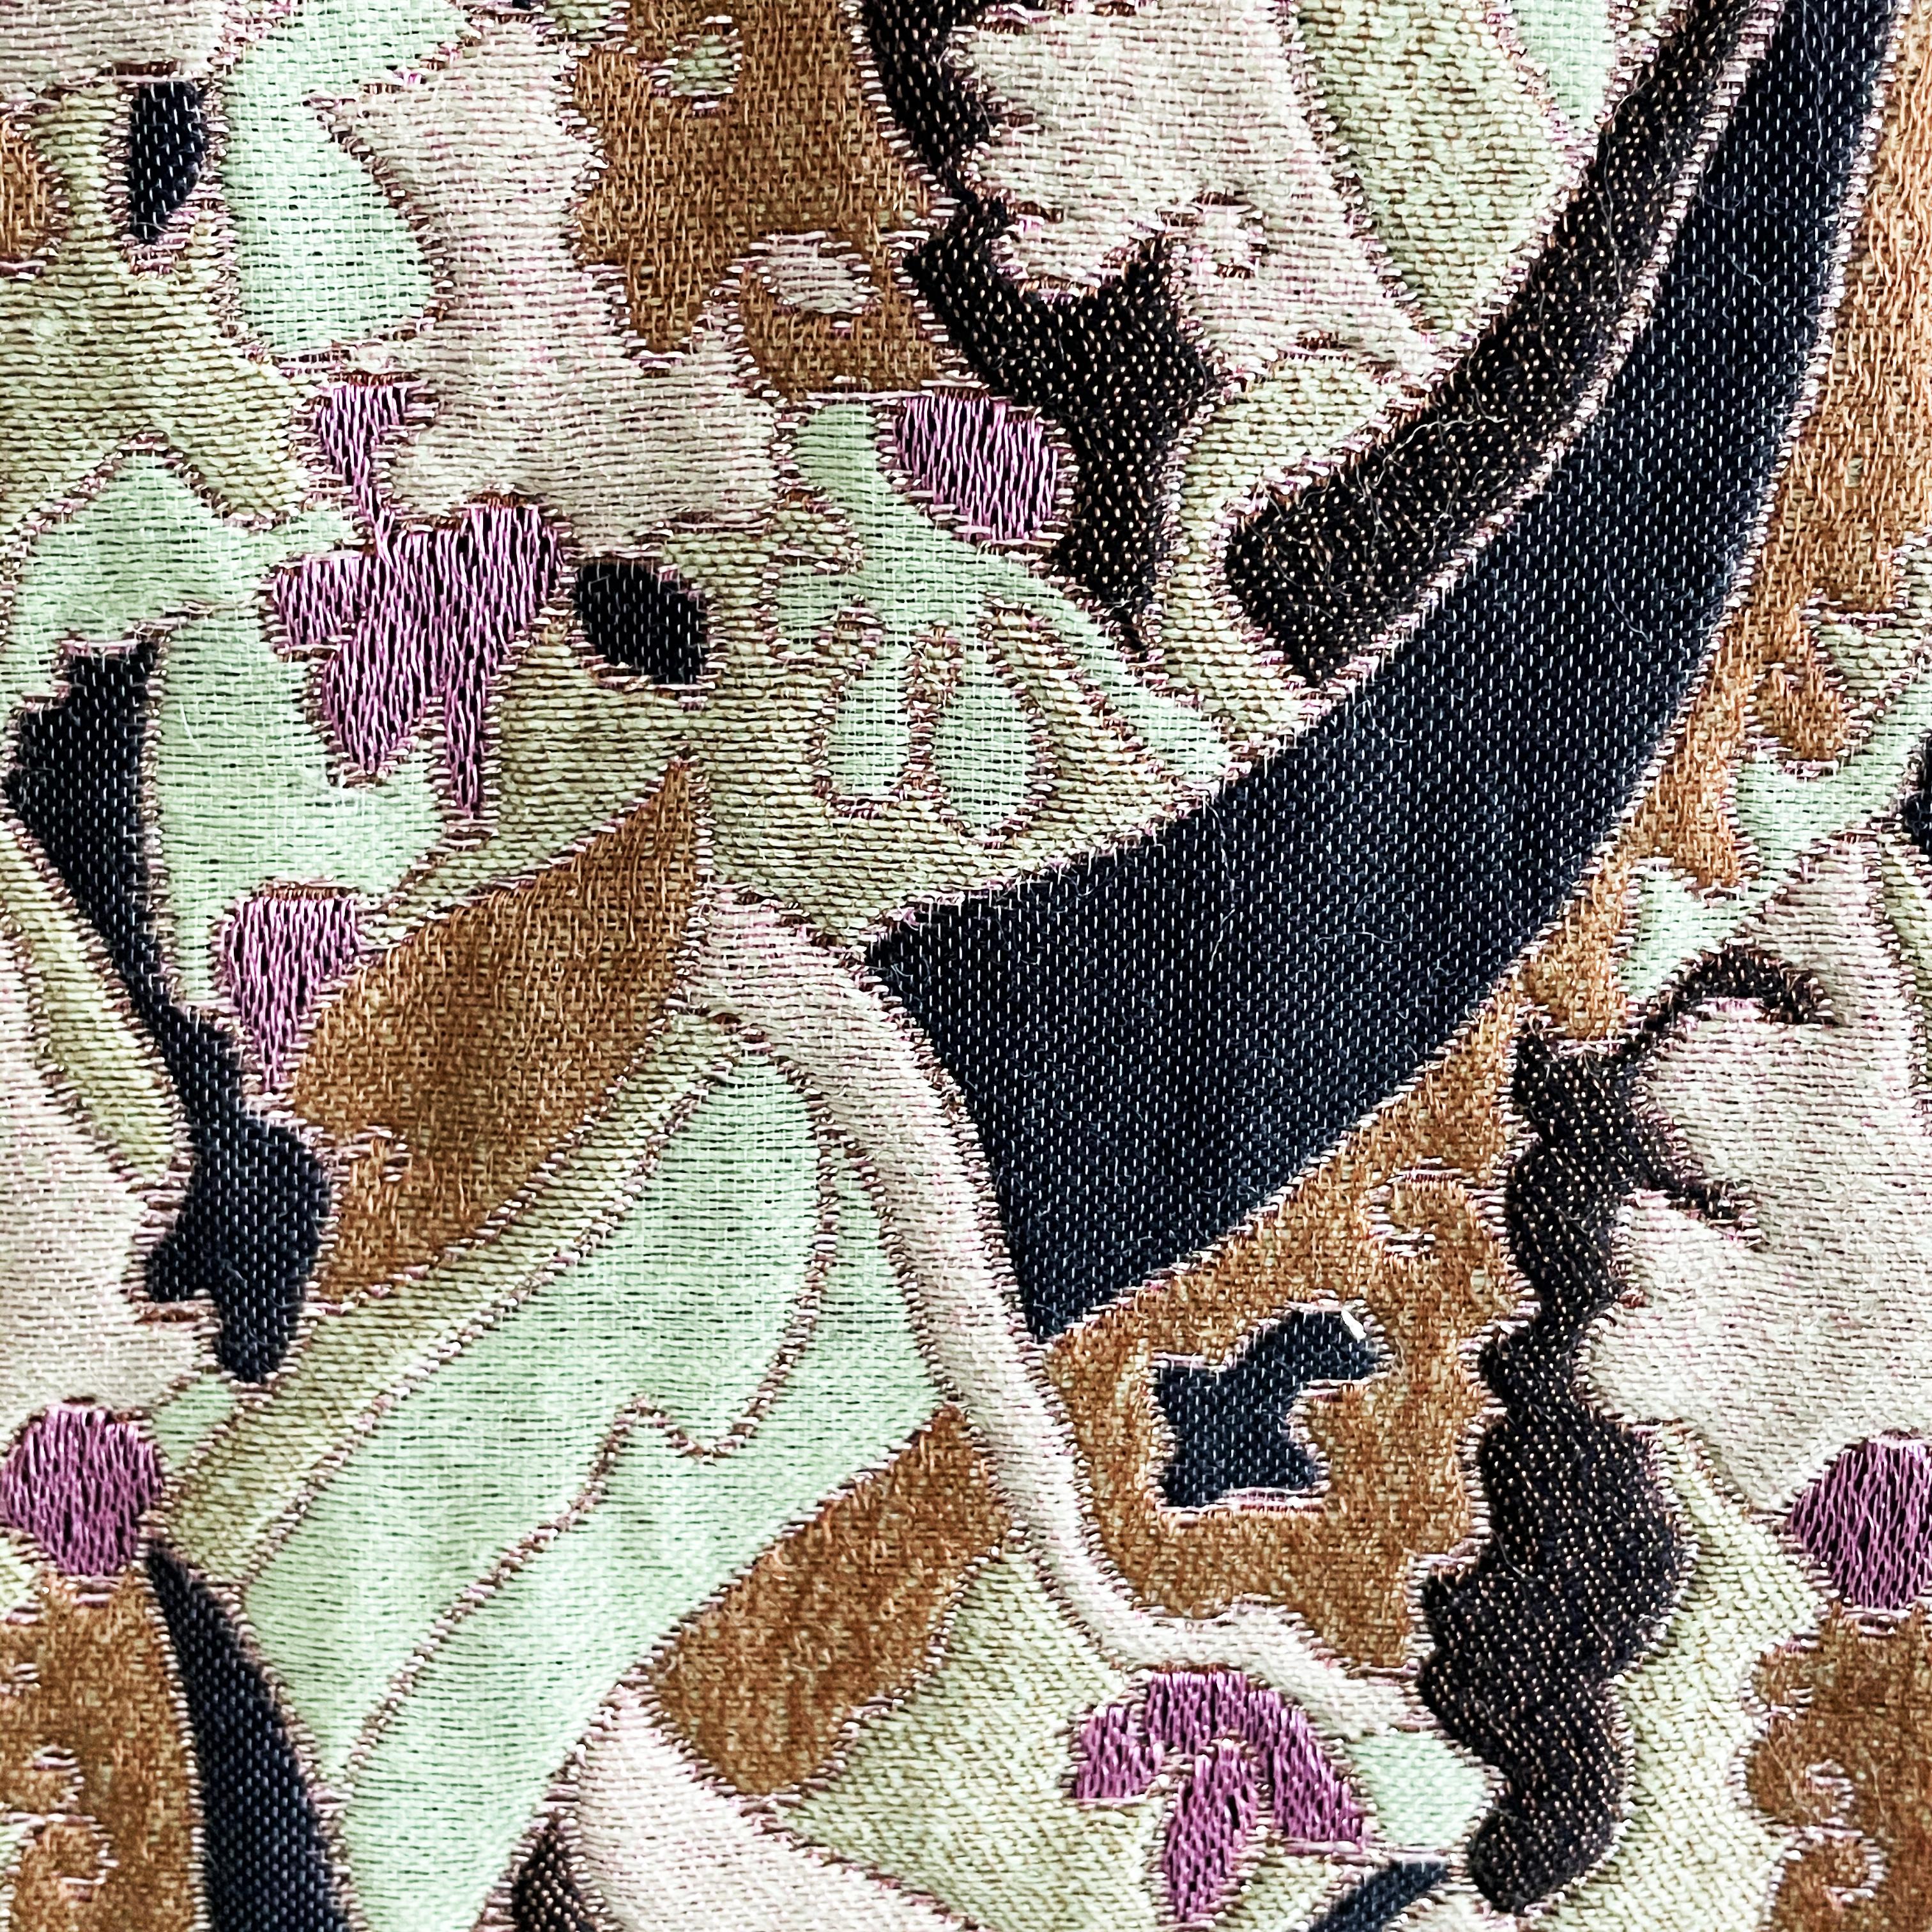 Vintage Brocade Coat or Coat Dress by James Galanos for Amelia Gray Boutique Beverly Hills, likely made in the late 60s. Incredible tapestry brocade in shades of pale green, lavender, brown & charcoal black, with decorative buttons at each chest